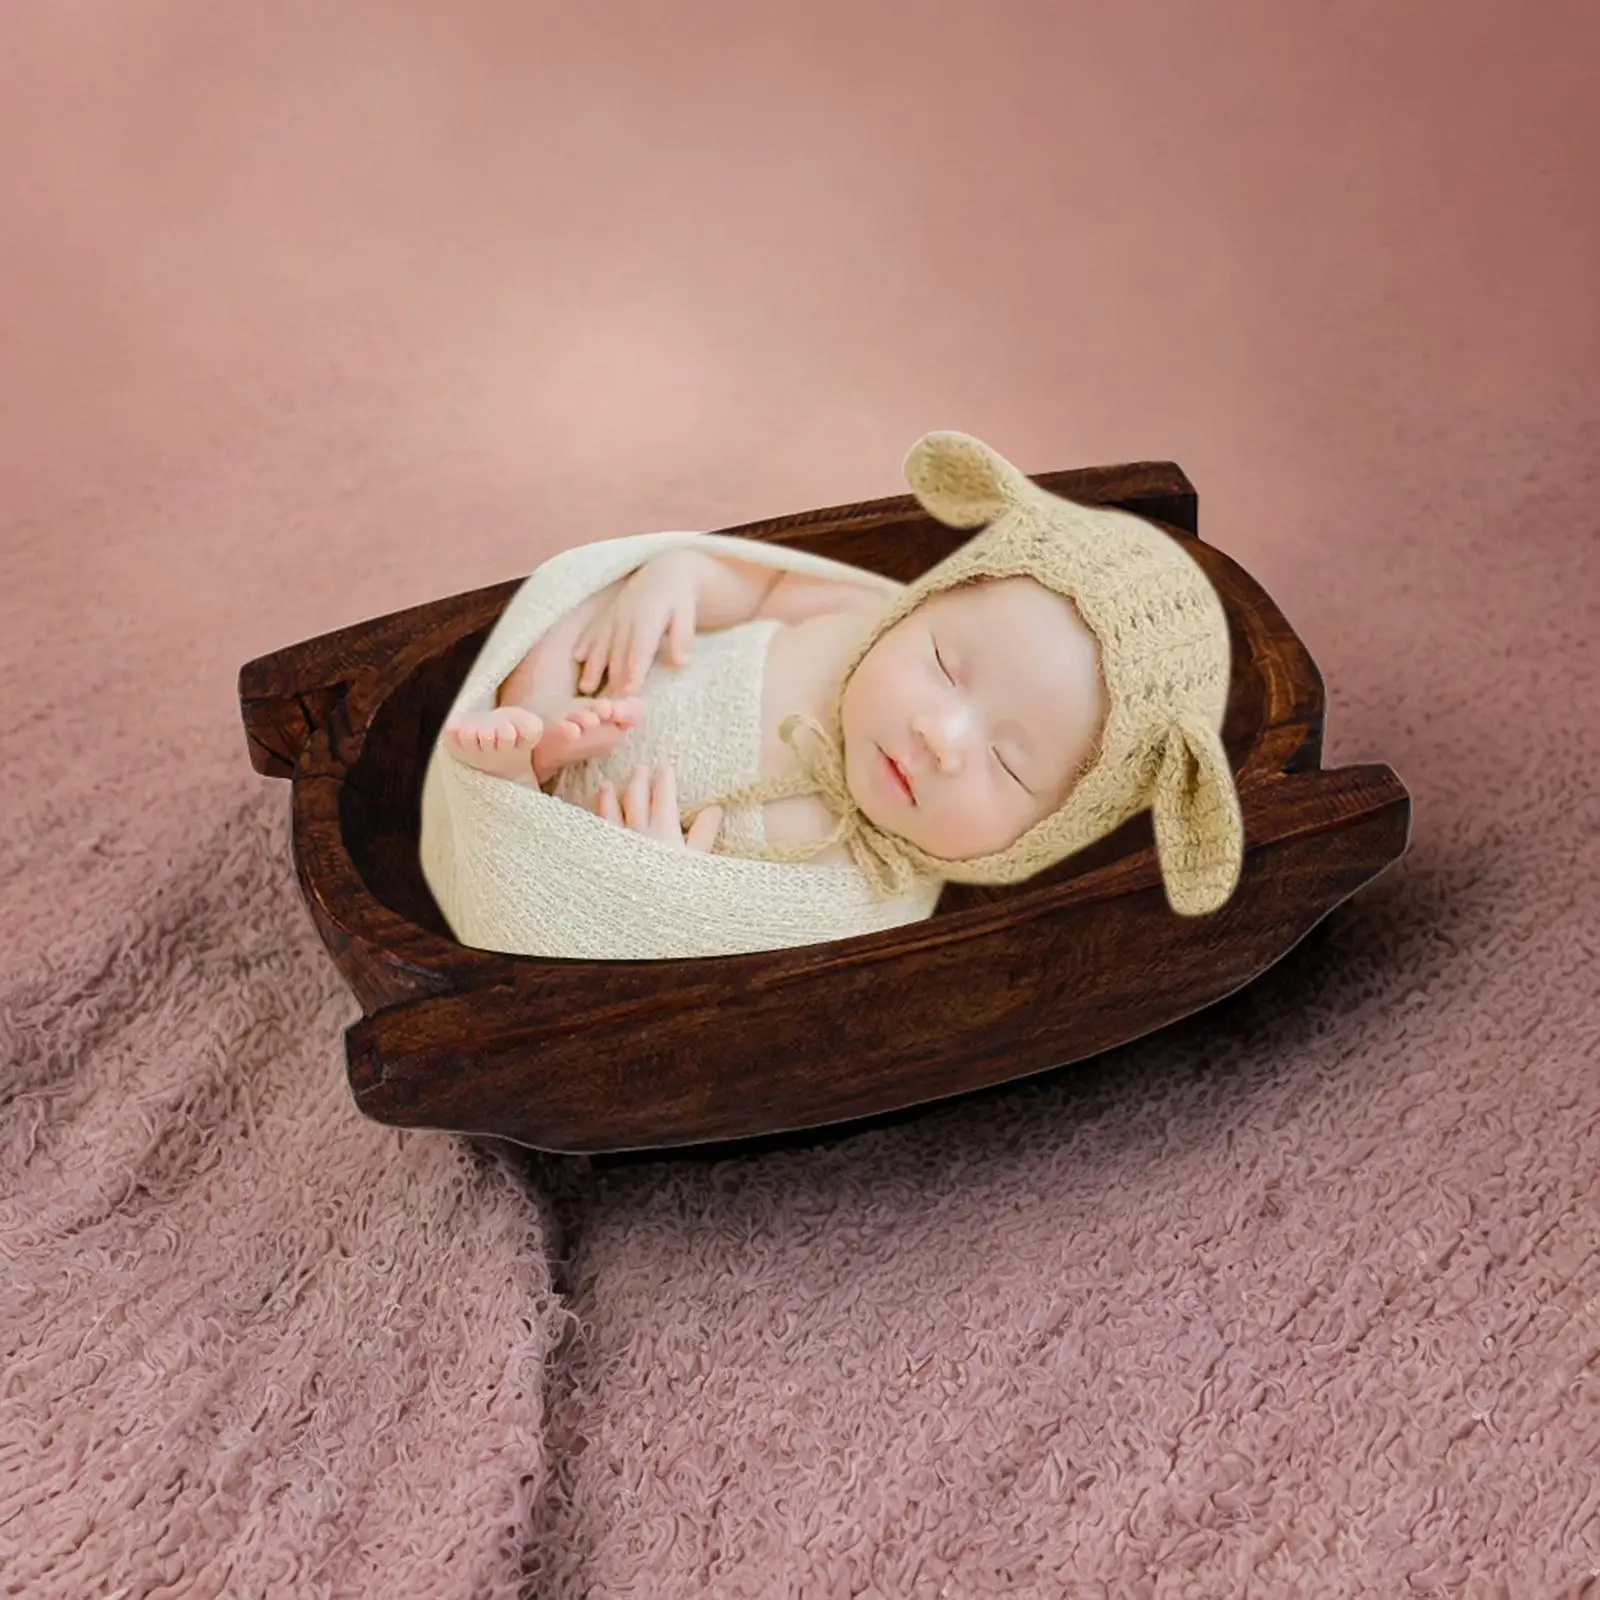 Newborn Photography Props Wooden Bowl Decor Vintage Small Couch Baskets for Baby Girls Boys Monthly Baby Newborn Birthday Decor